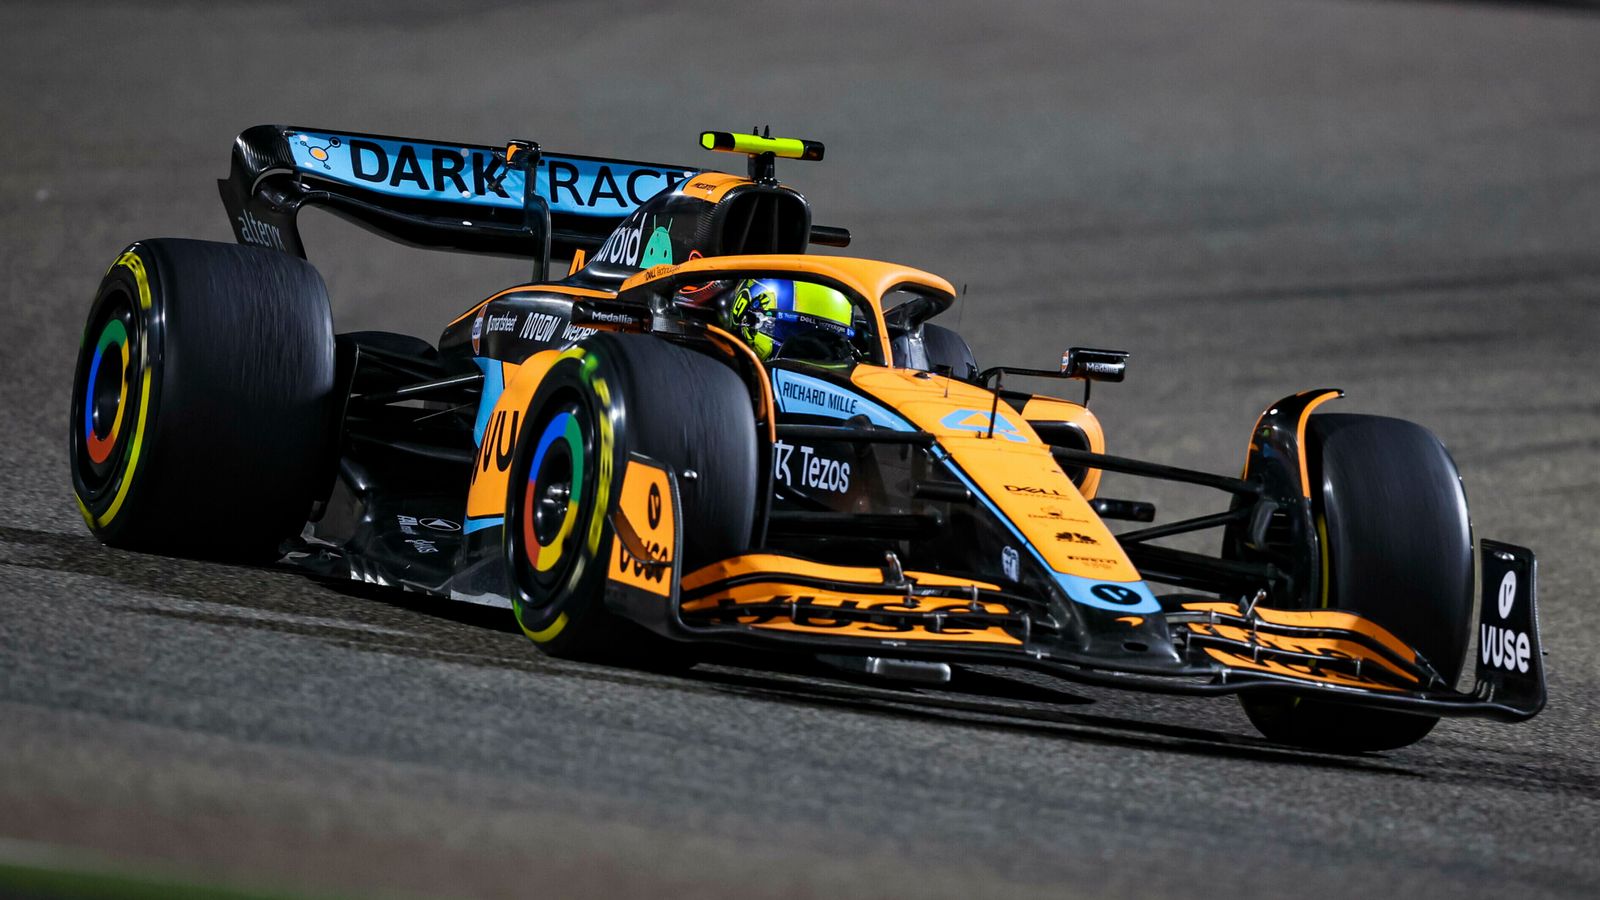 Lando Norris says it will not be ‘a simple fix’ as McLaren look to turnaround MCL36 after Bahrain challenges